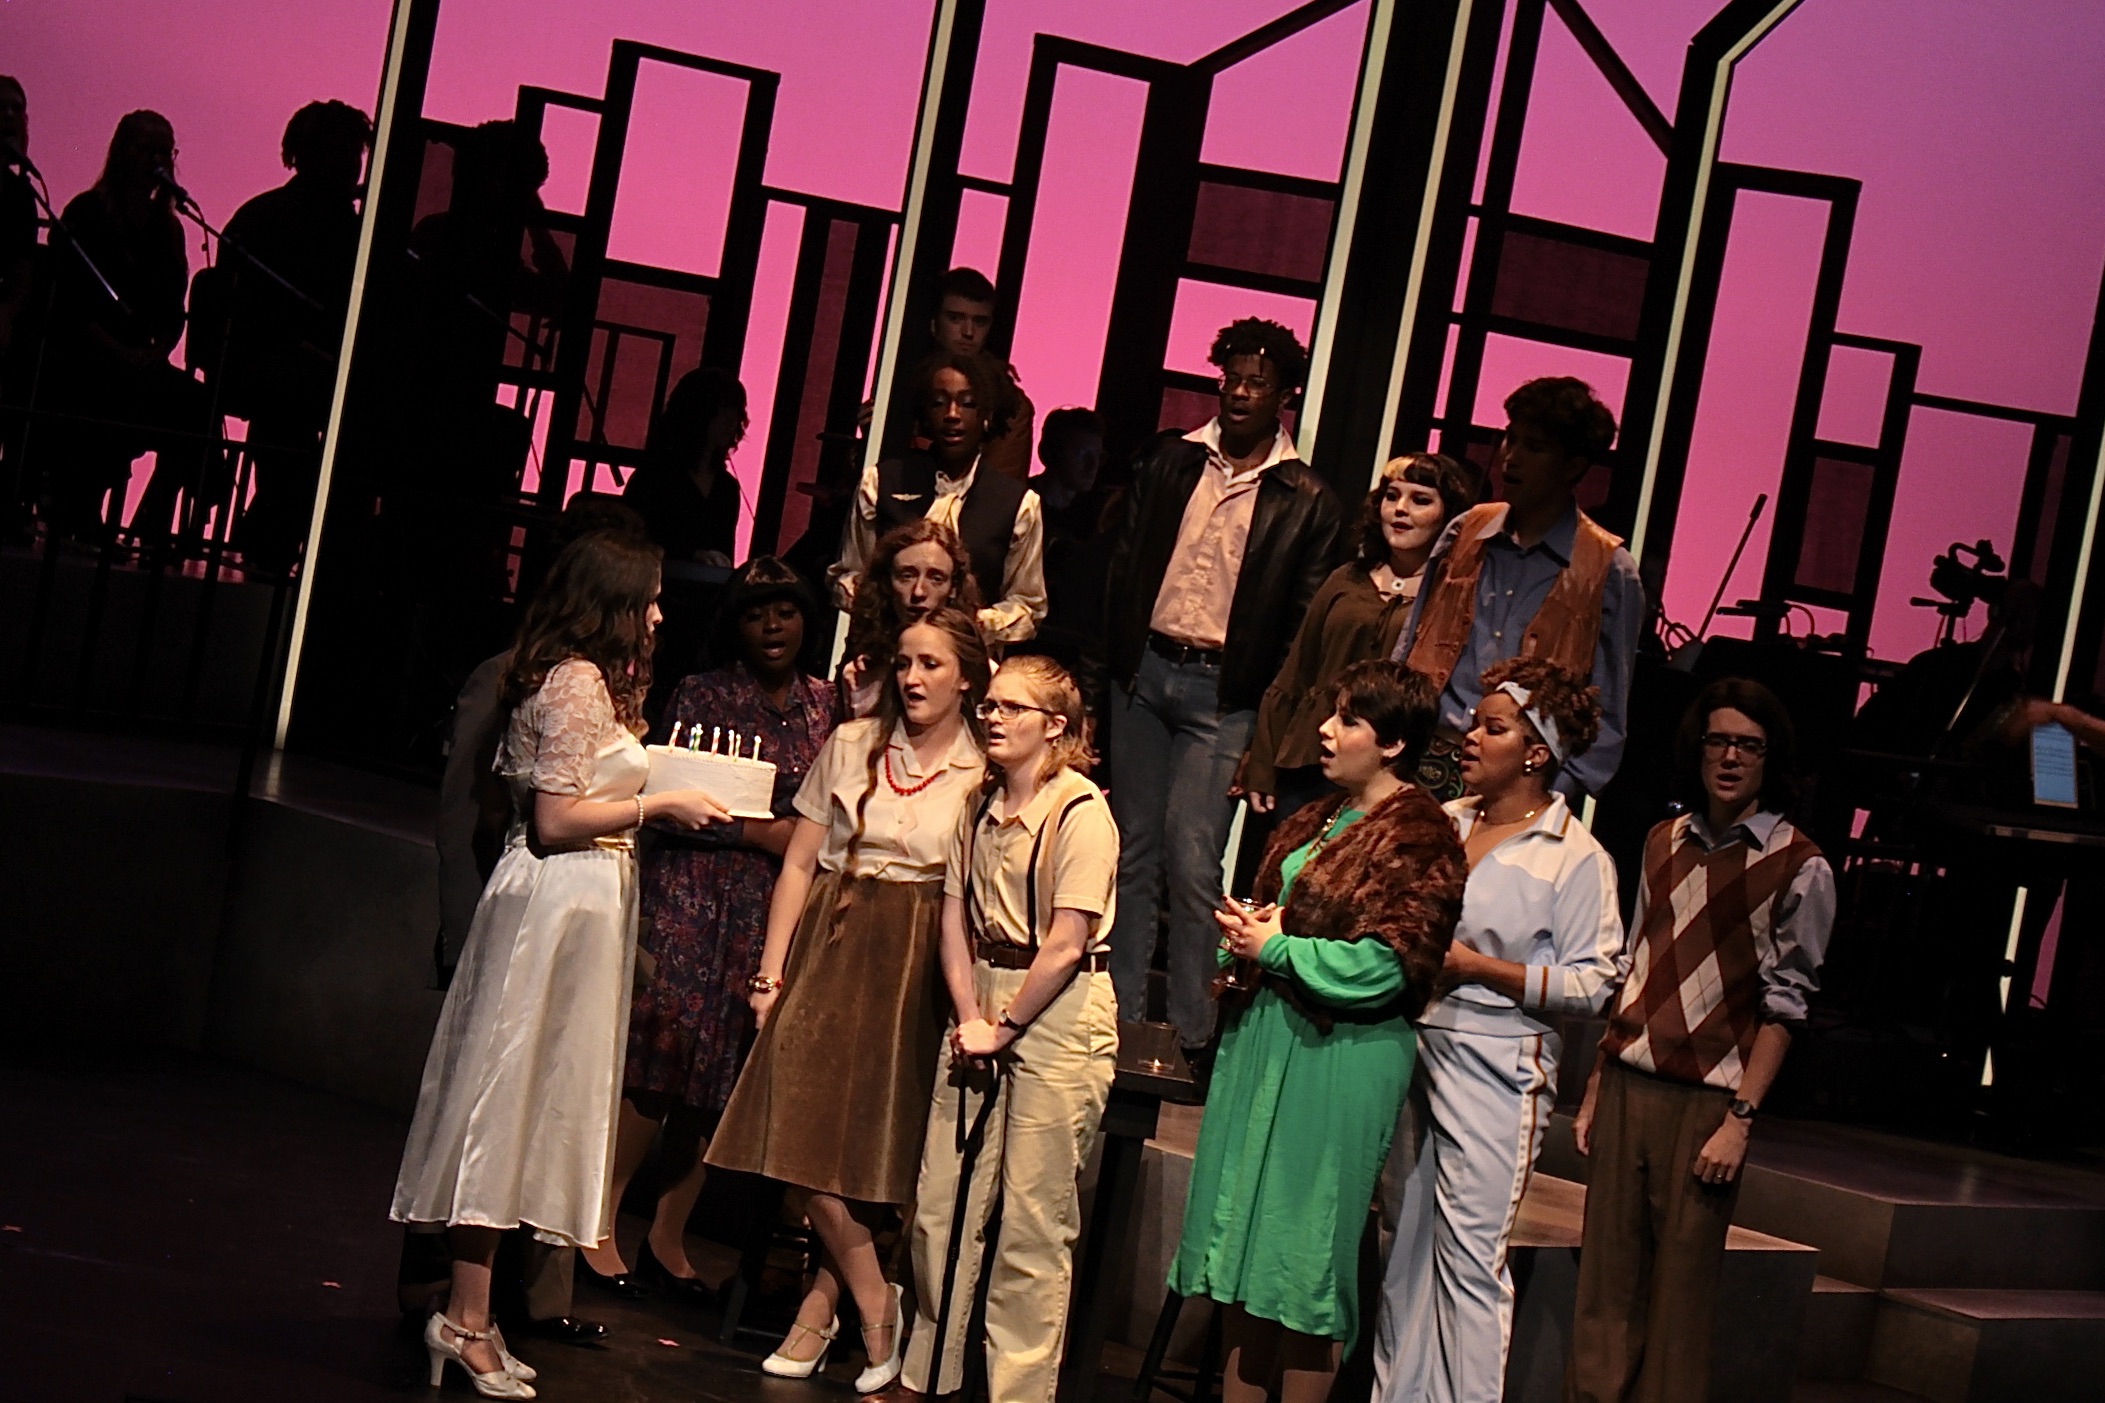 Theatre students charm audiences with production of ‘Company’